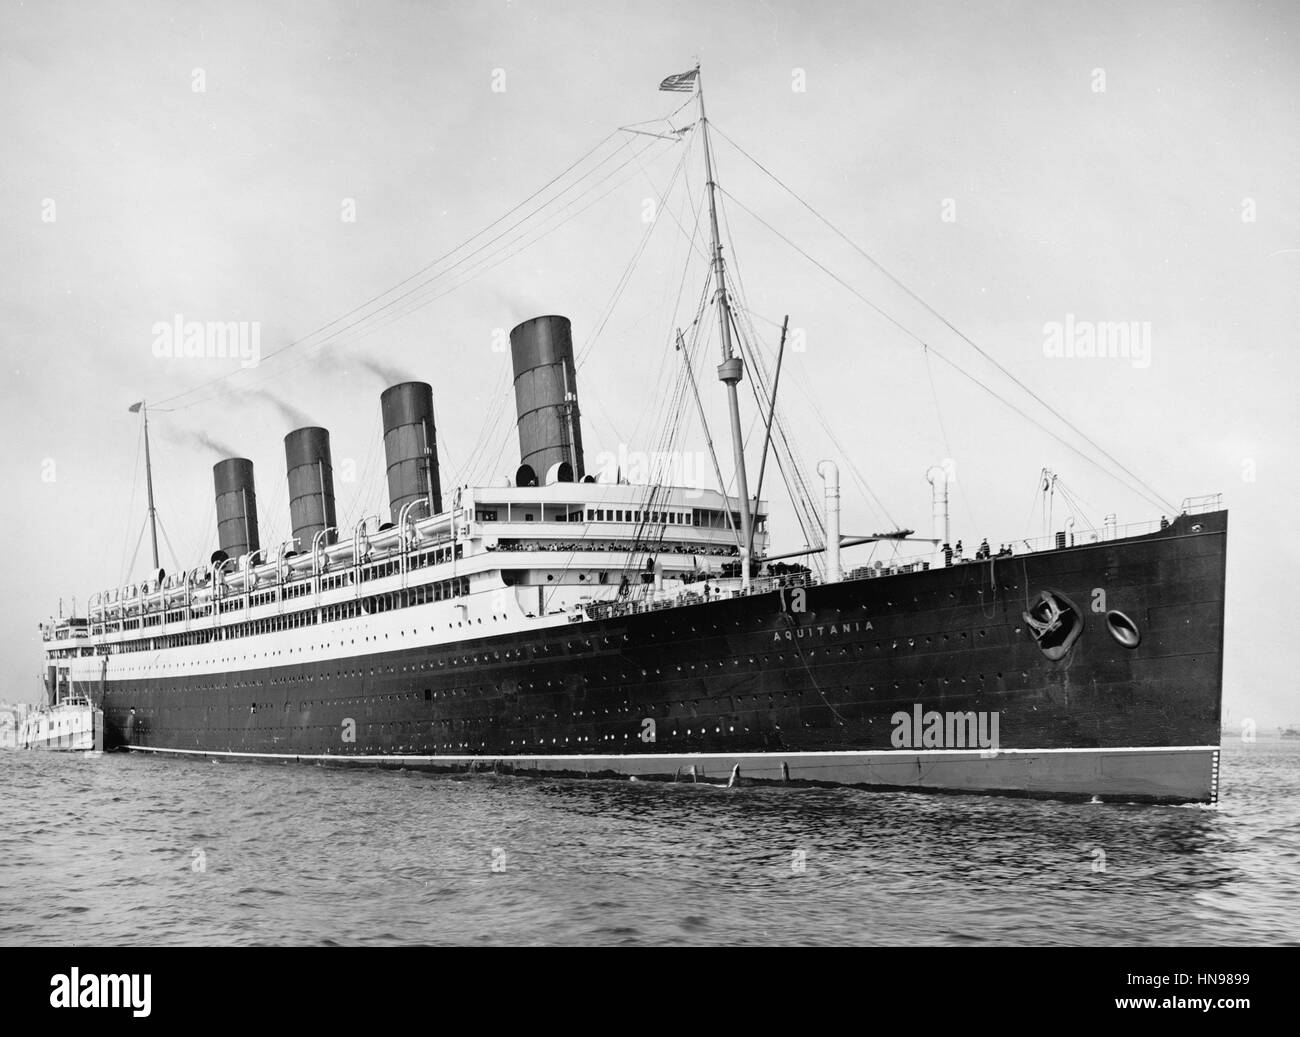 RMS AQUITANIA Cunard Line transatlantic passenger ship (1913-1950) shown in New York harbour on her maiden voyage in May 1914 Stock Photo